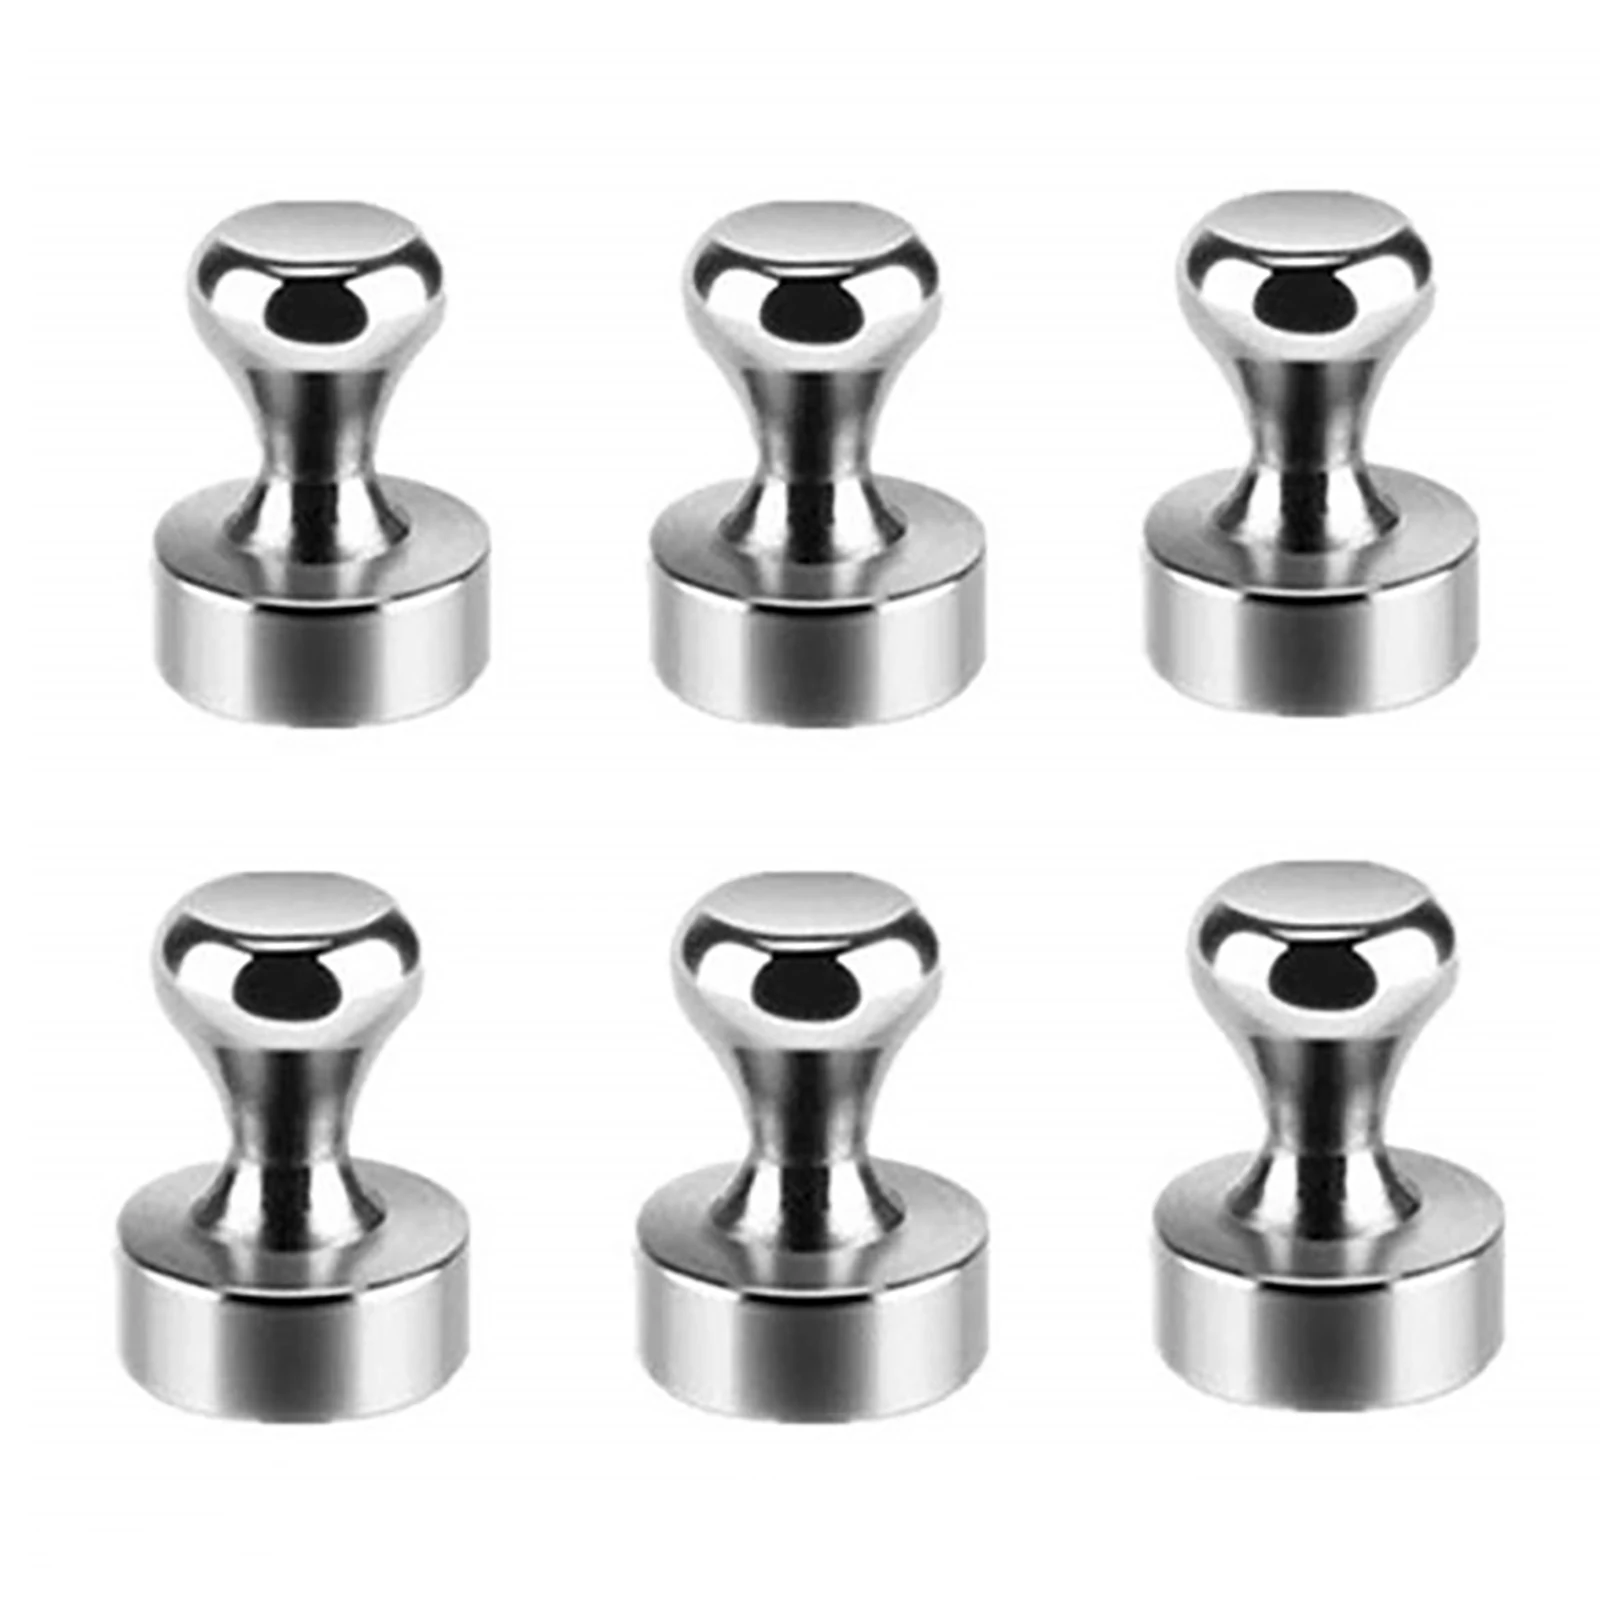 6Pcs Magnetic Push Pins Office Neodymium Metal Strong Pins Cone Stainless Steel Magnet for Refrigerator Magnet Pinboard